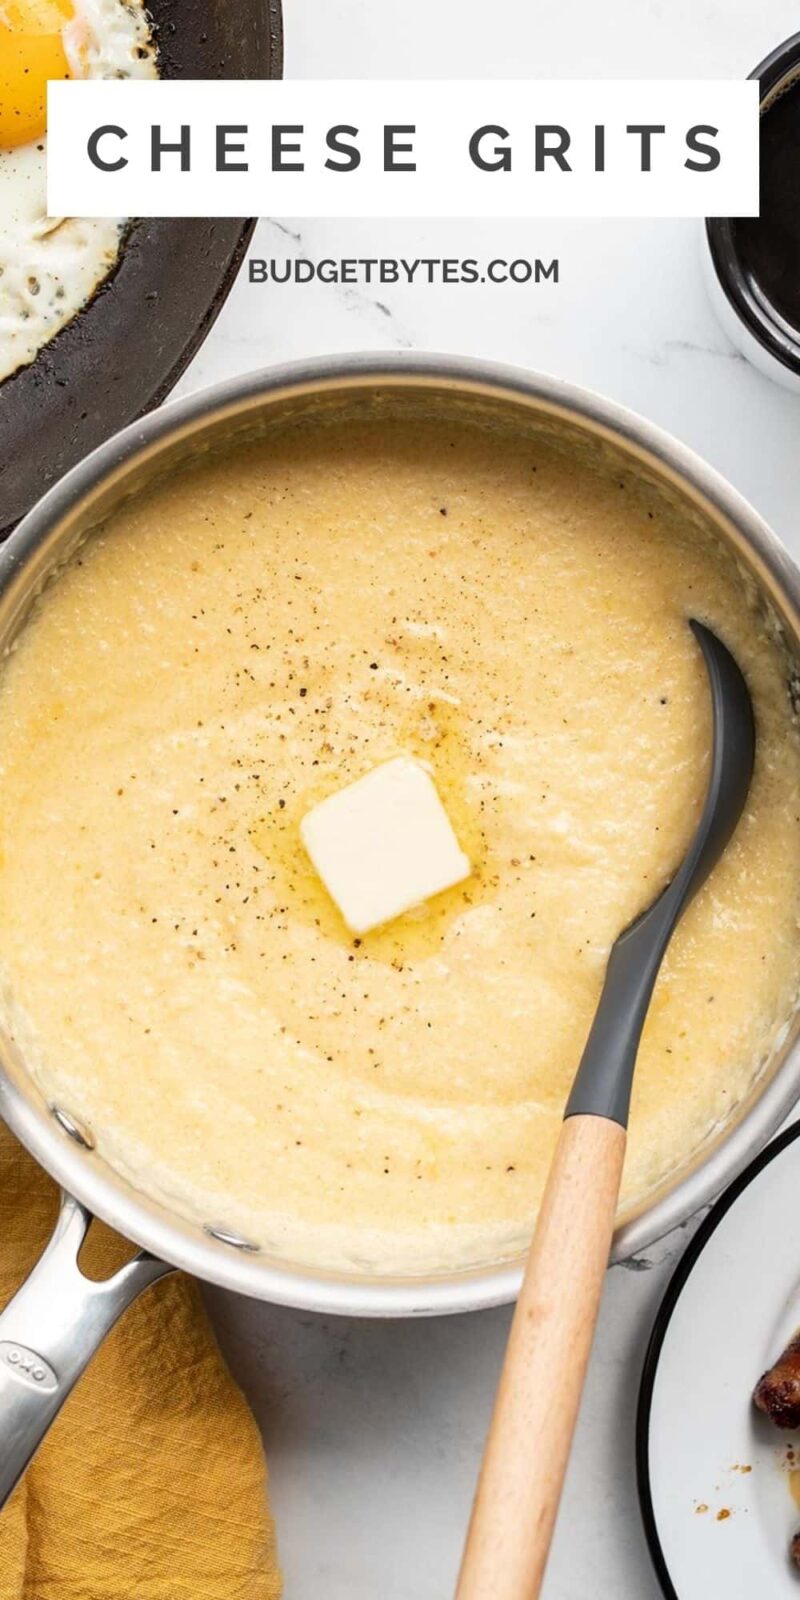 Cheese grits in a pot with melted butter and pepper, title text at the top